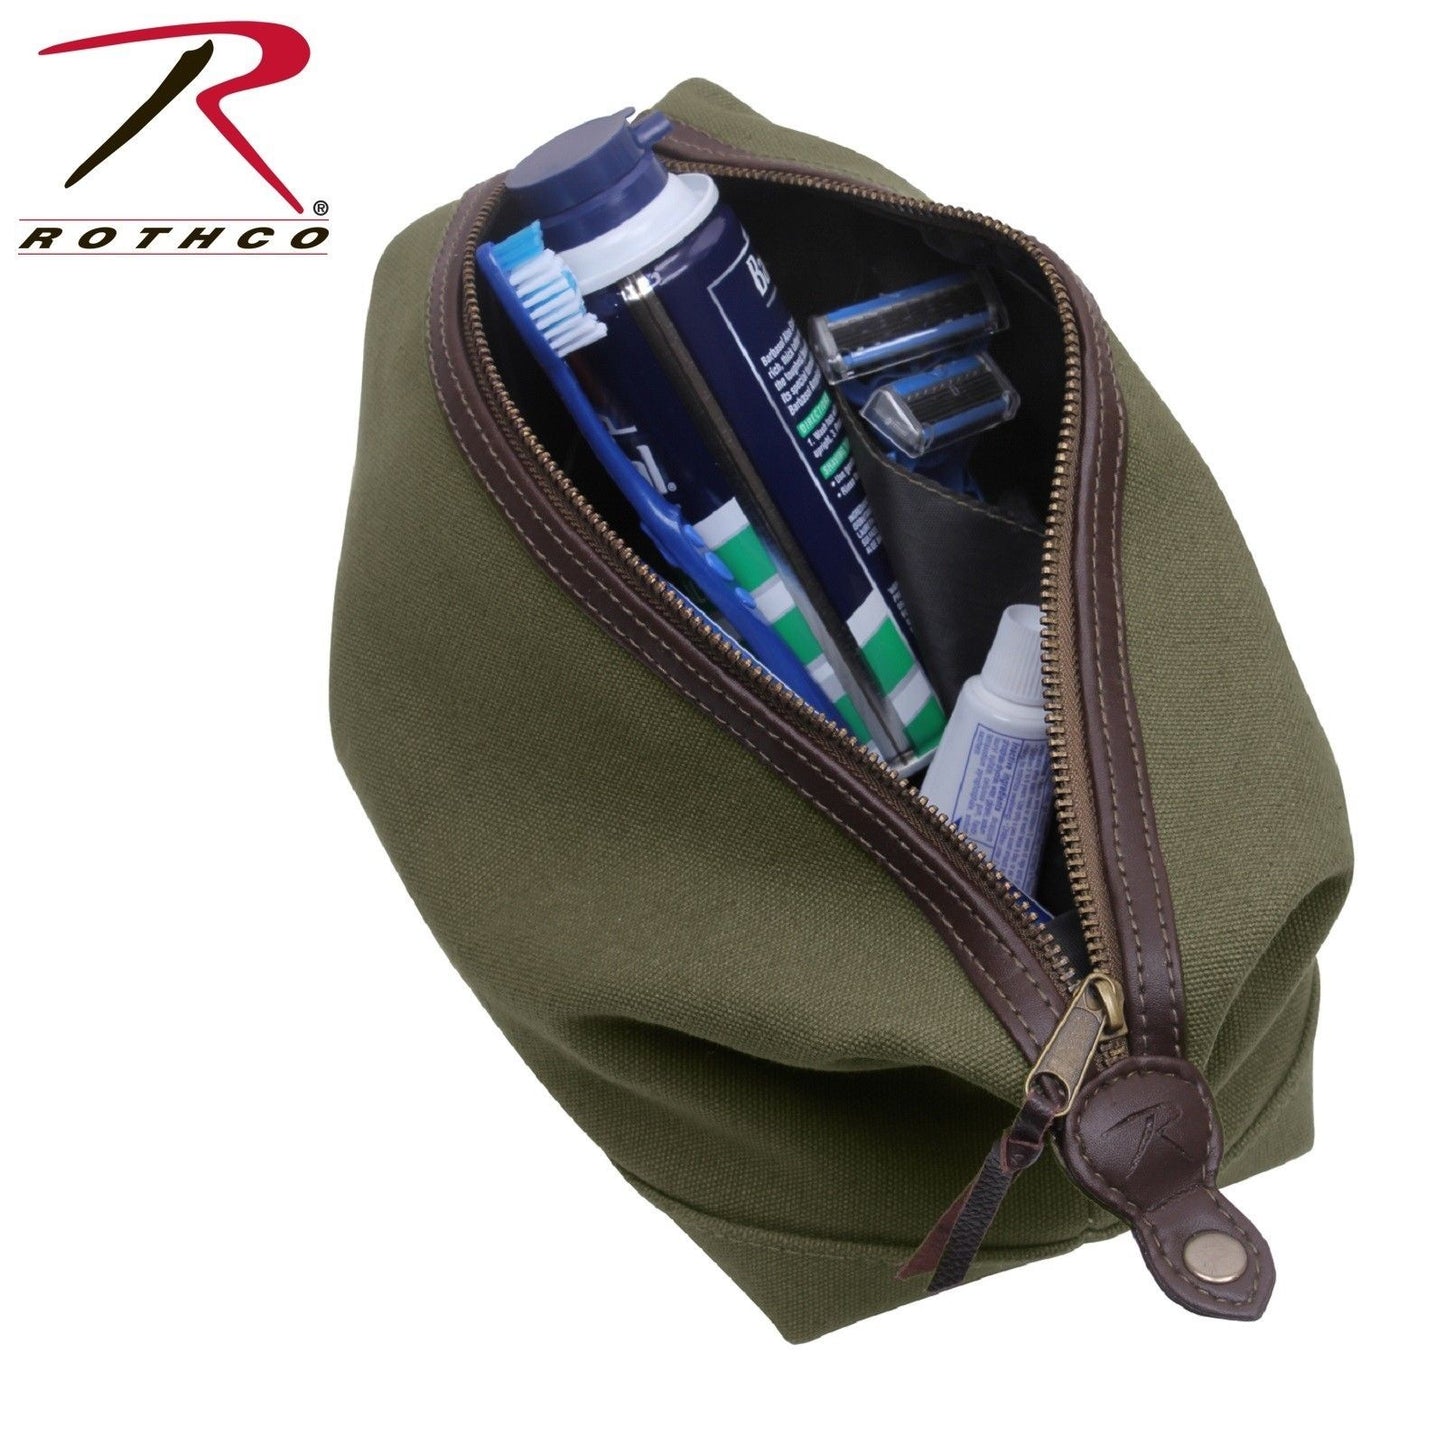 Rothco Canvas Leather Travel Kit - Olive Drab Dopp Type Bag Toiletry Travel Bag